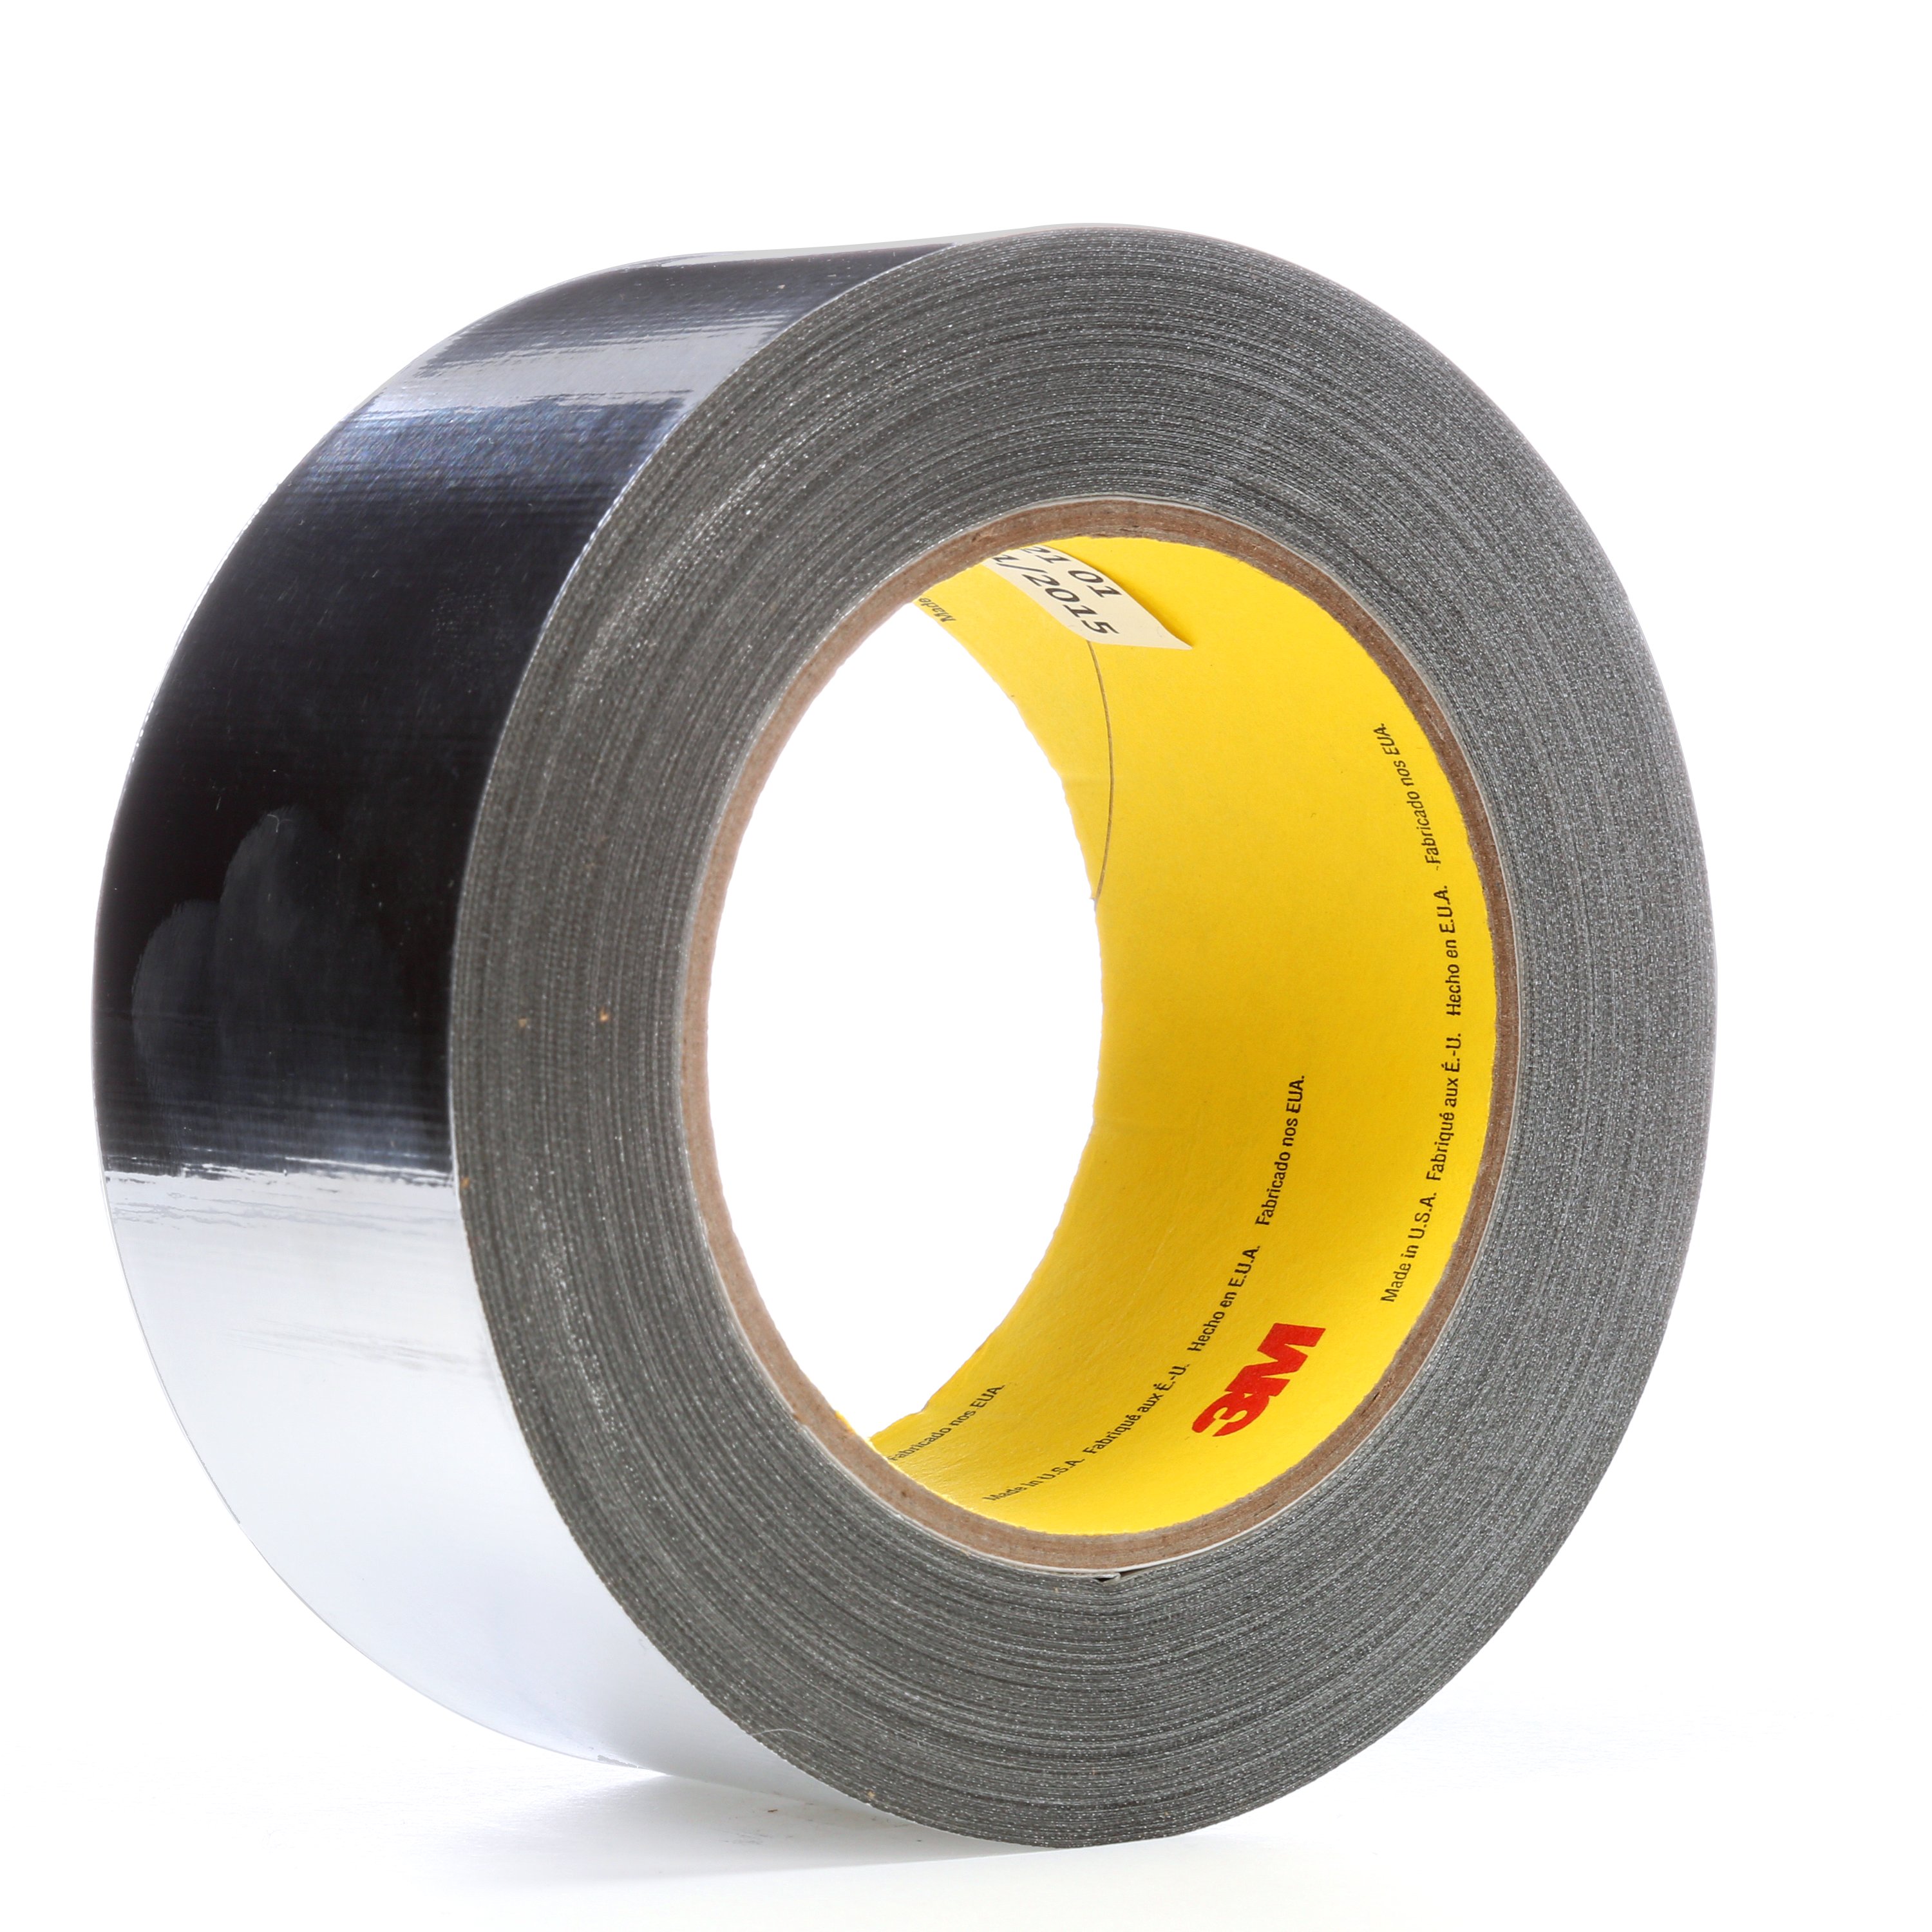 3M™ PTFE Glass Cloth Tape 5451, Brown, 1 1/2 in x 36 yd, 5.6 mil